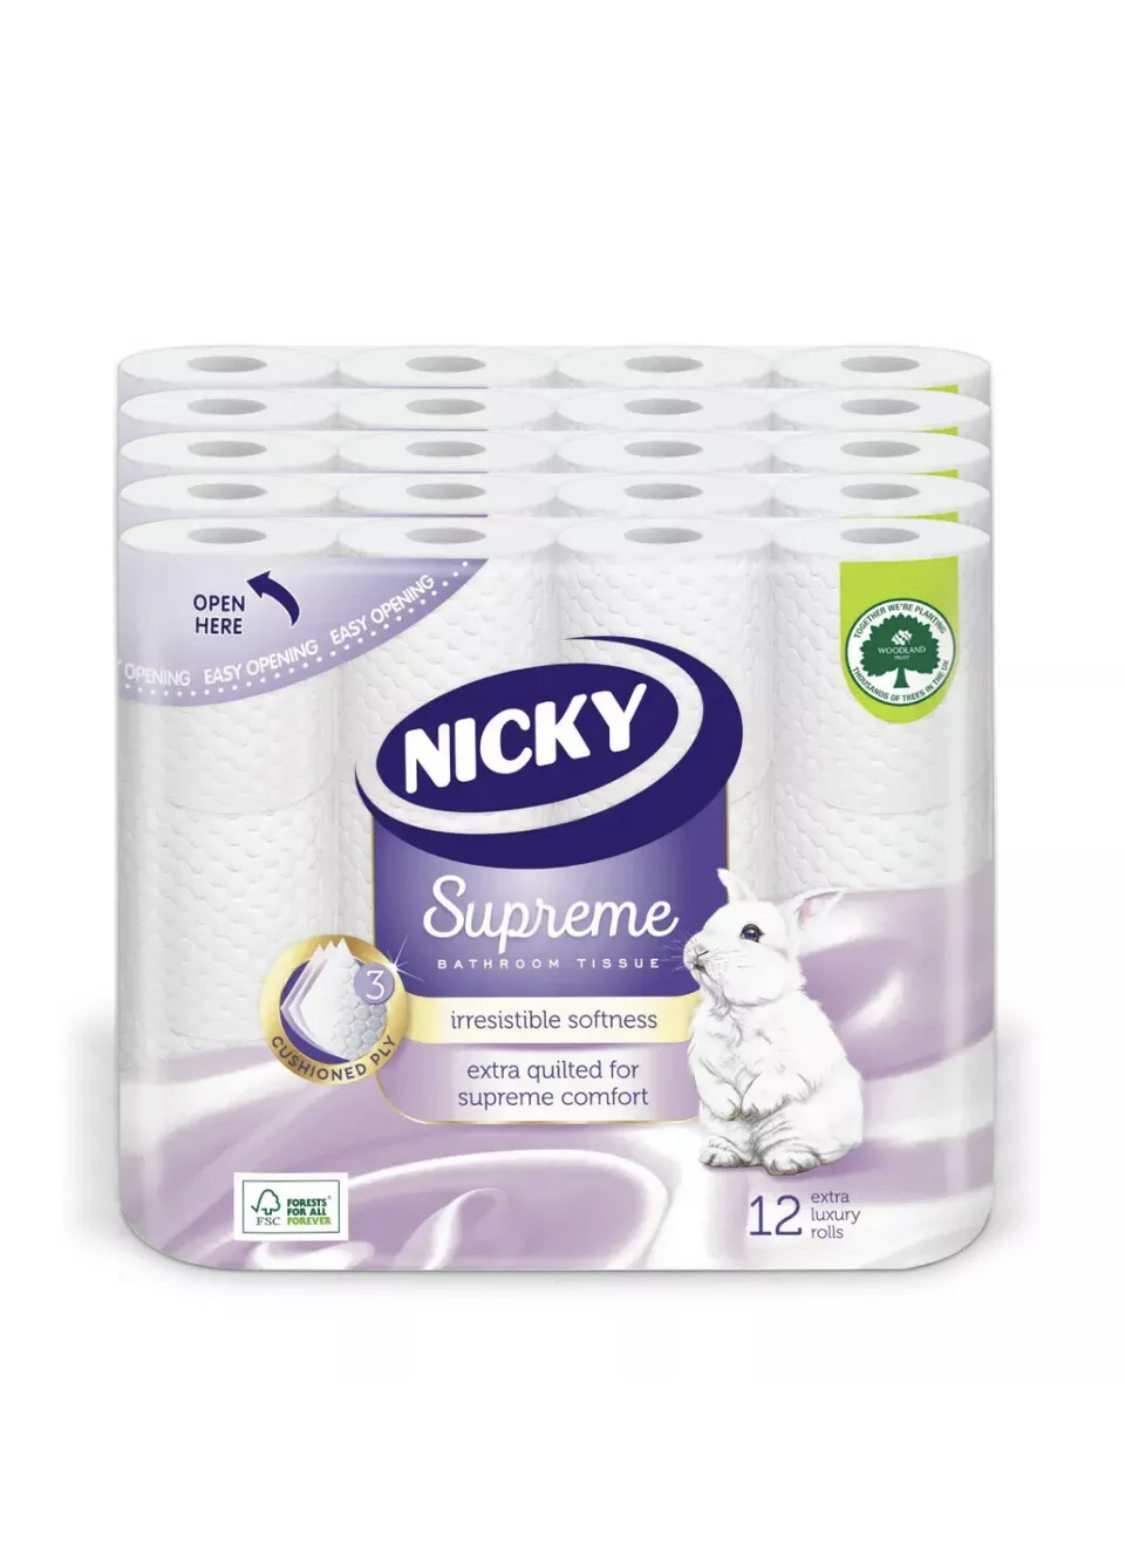 Nicky Supreme, 3 ply quilted T/Rolls, 12 x 5 pack (60 rolls